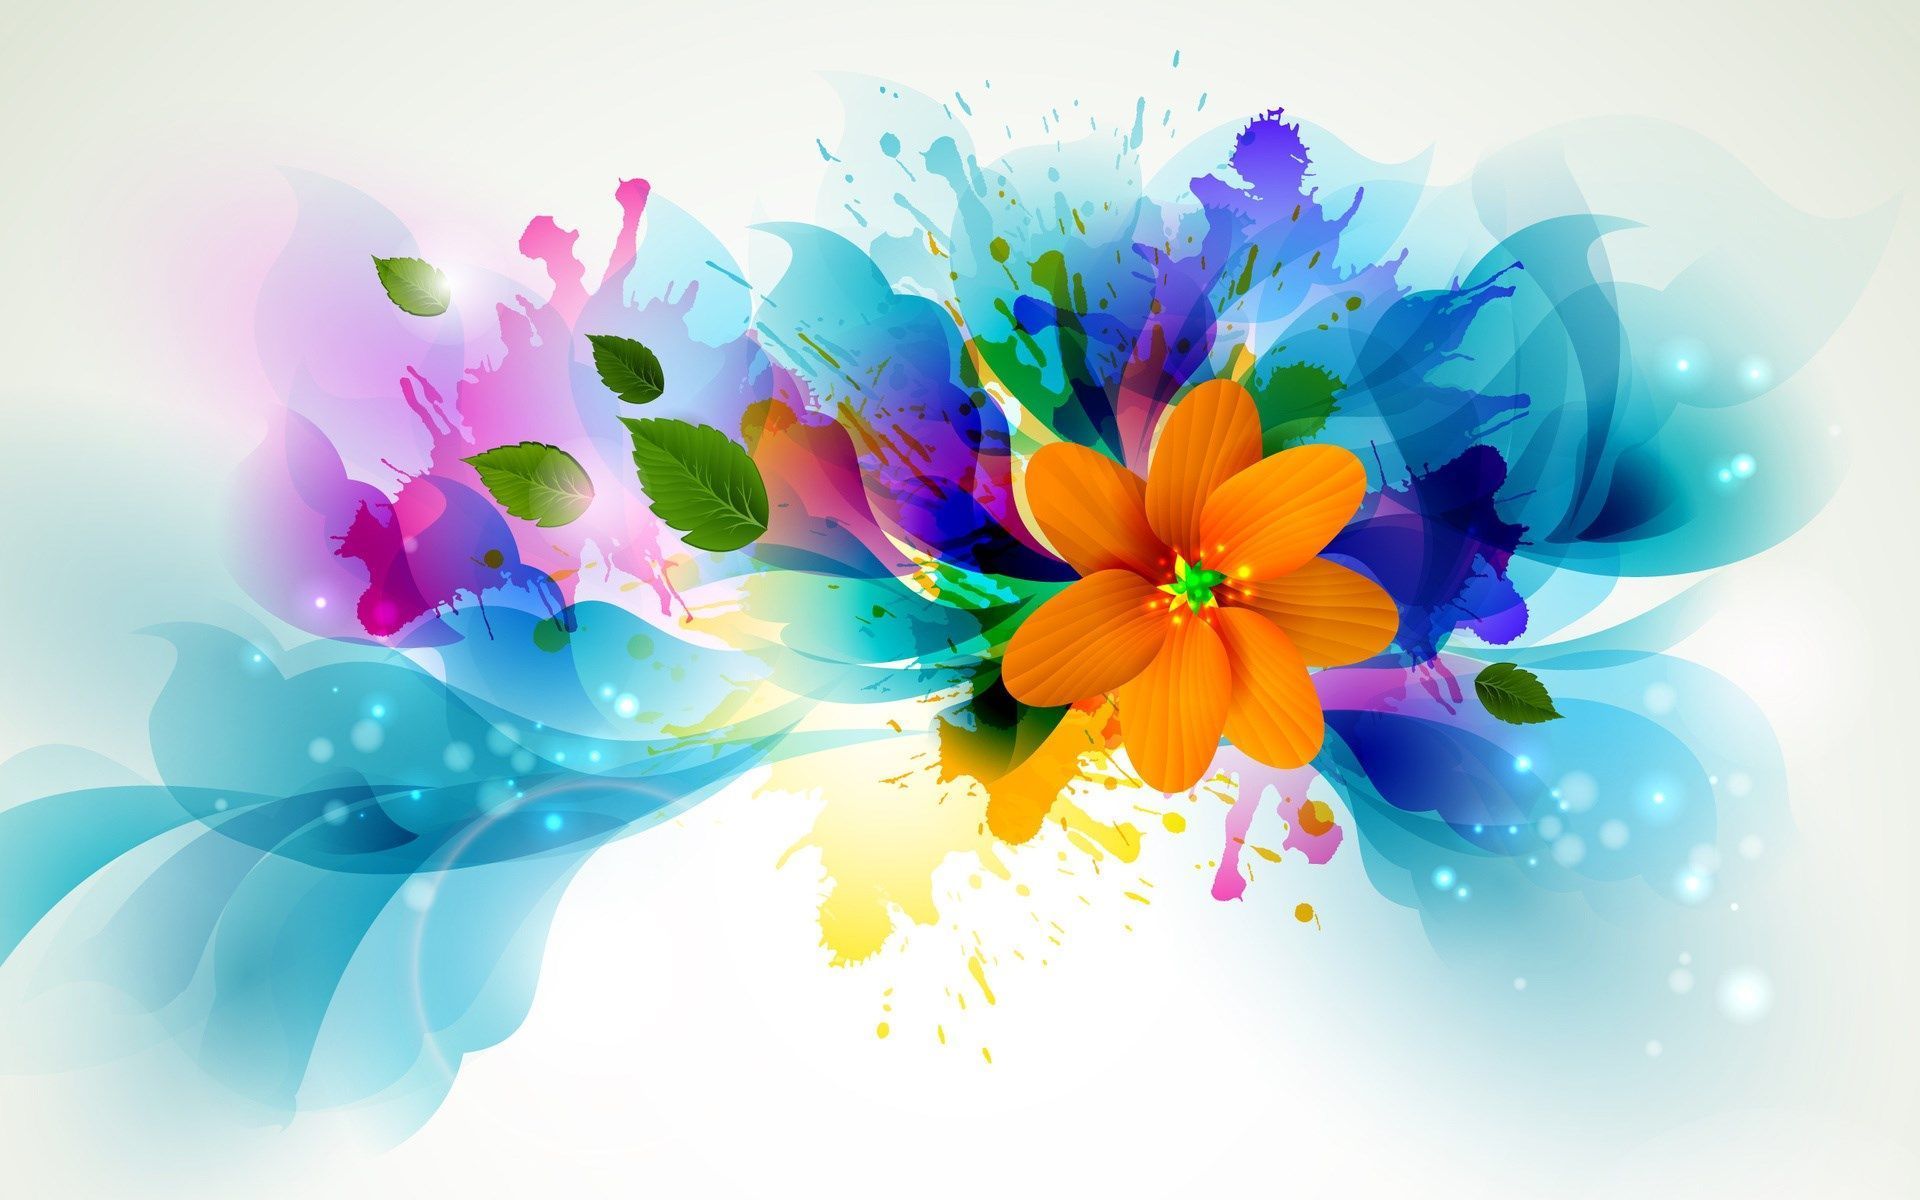 Colorful Bright Hd Abstract Wallpapers